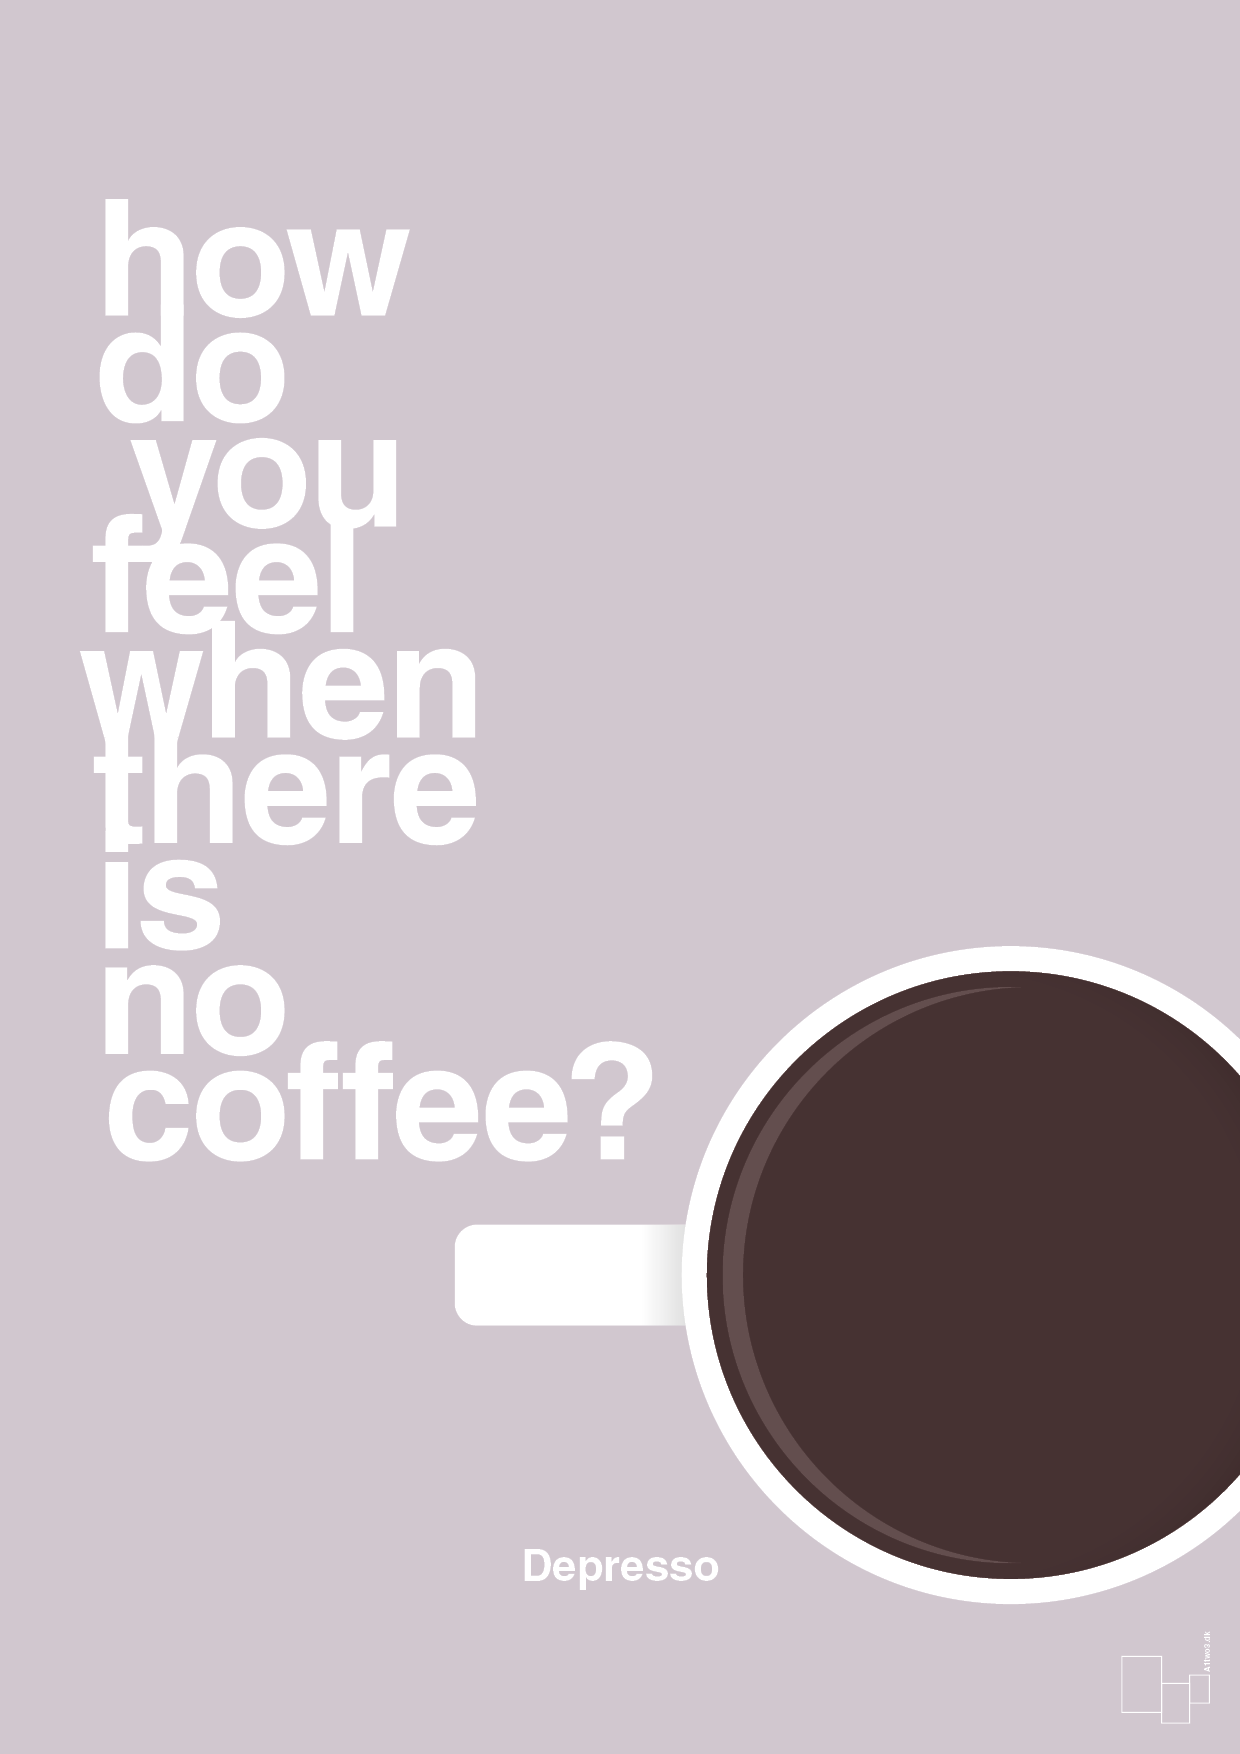 how do you feel when there is no coffee? depresso - Plakat med Mad & Drikke i Dusty Lilac